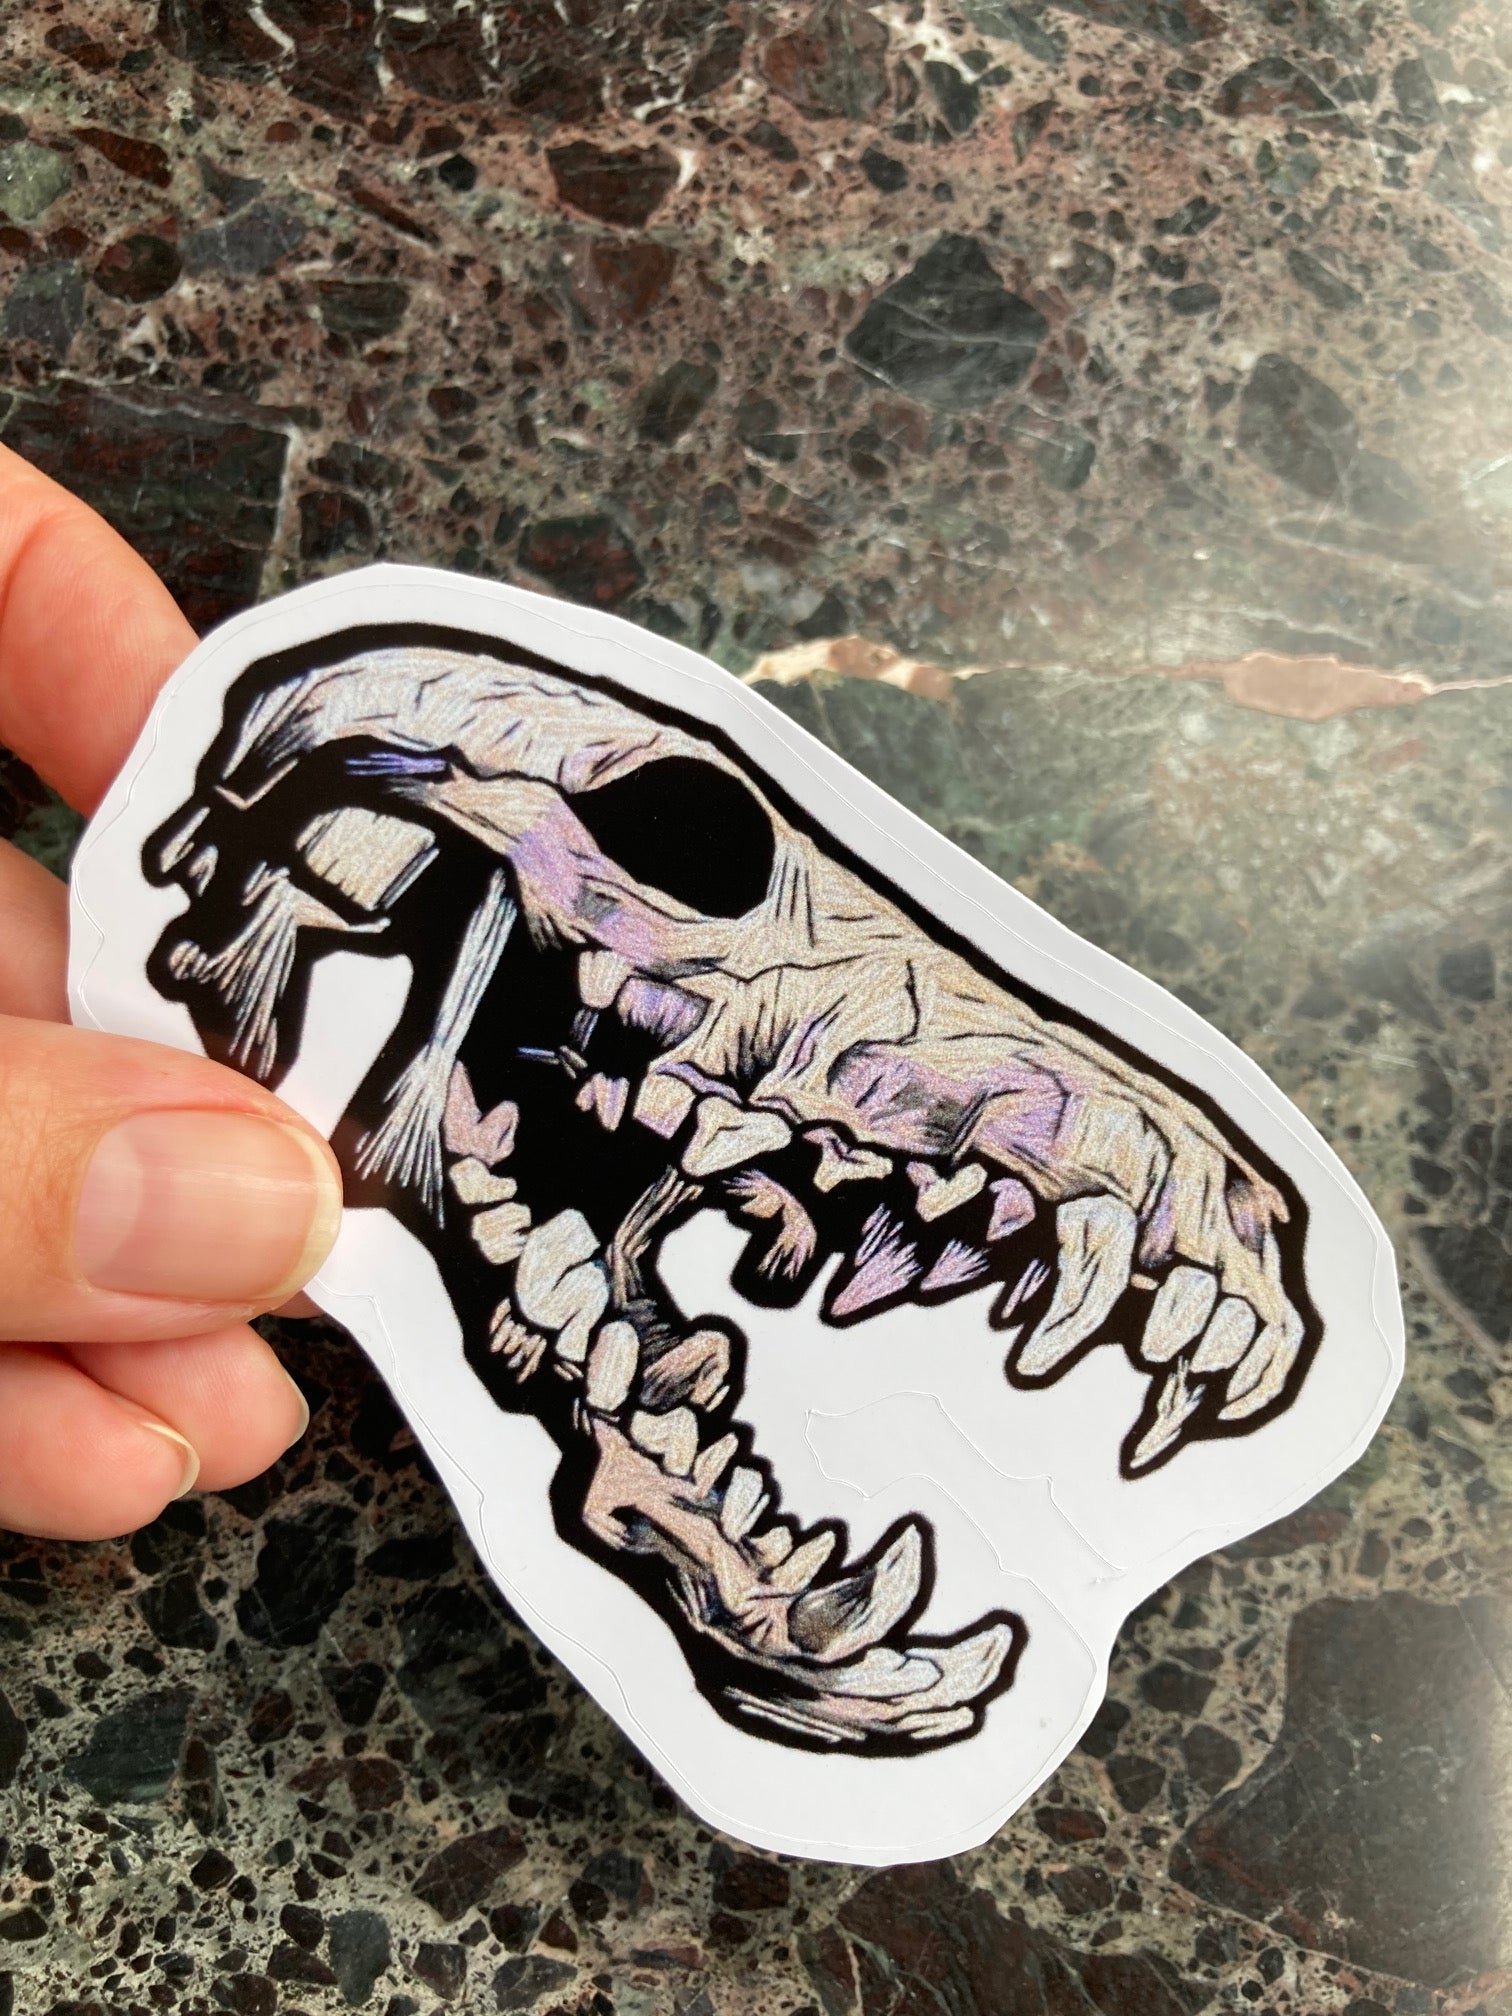 a hand holds up a sticker depicting an embroidered coyote skeleton with an open mouth and lots of teeth above a dark surface. The Embroidered skull is beige and lavender and black tones with lots of shadows. 